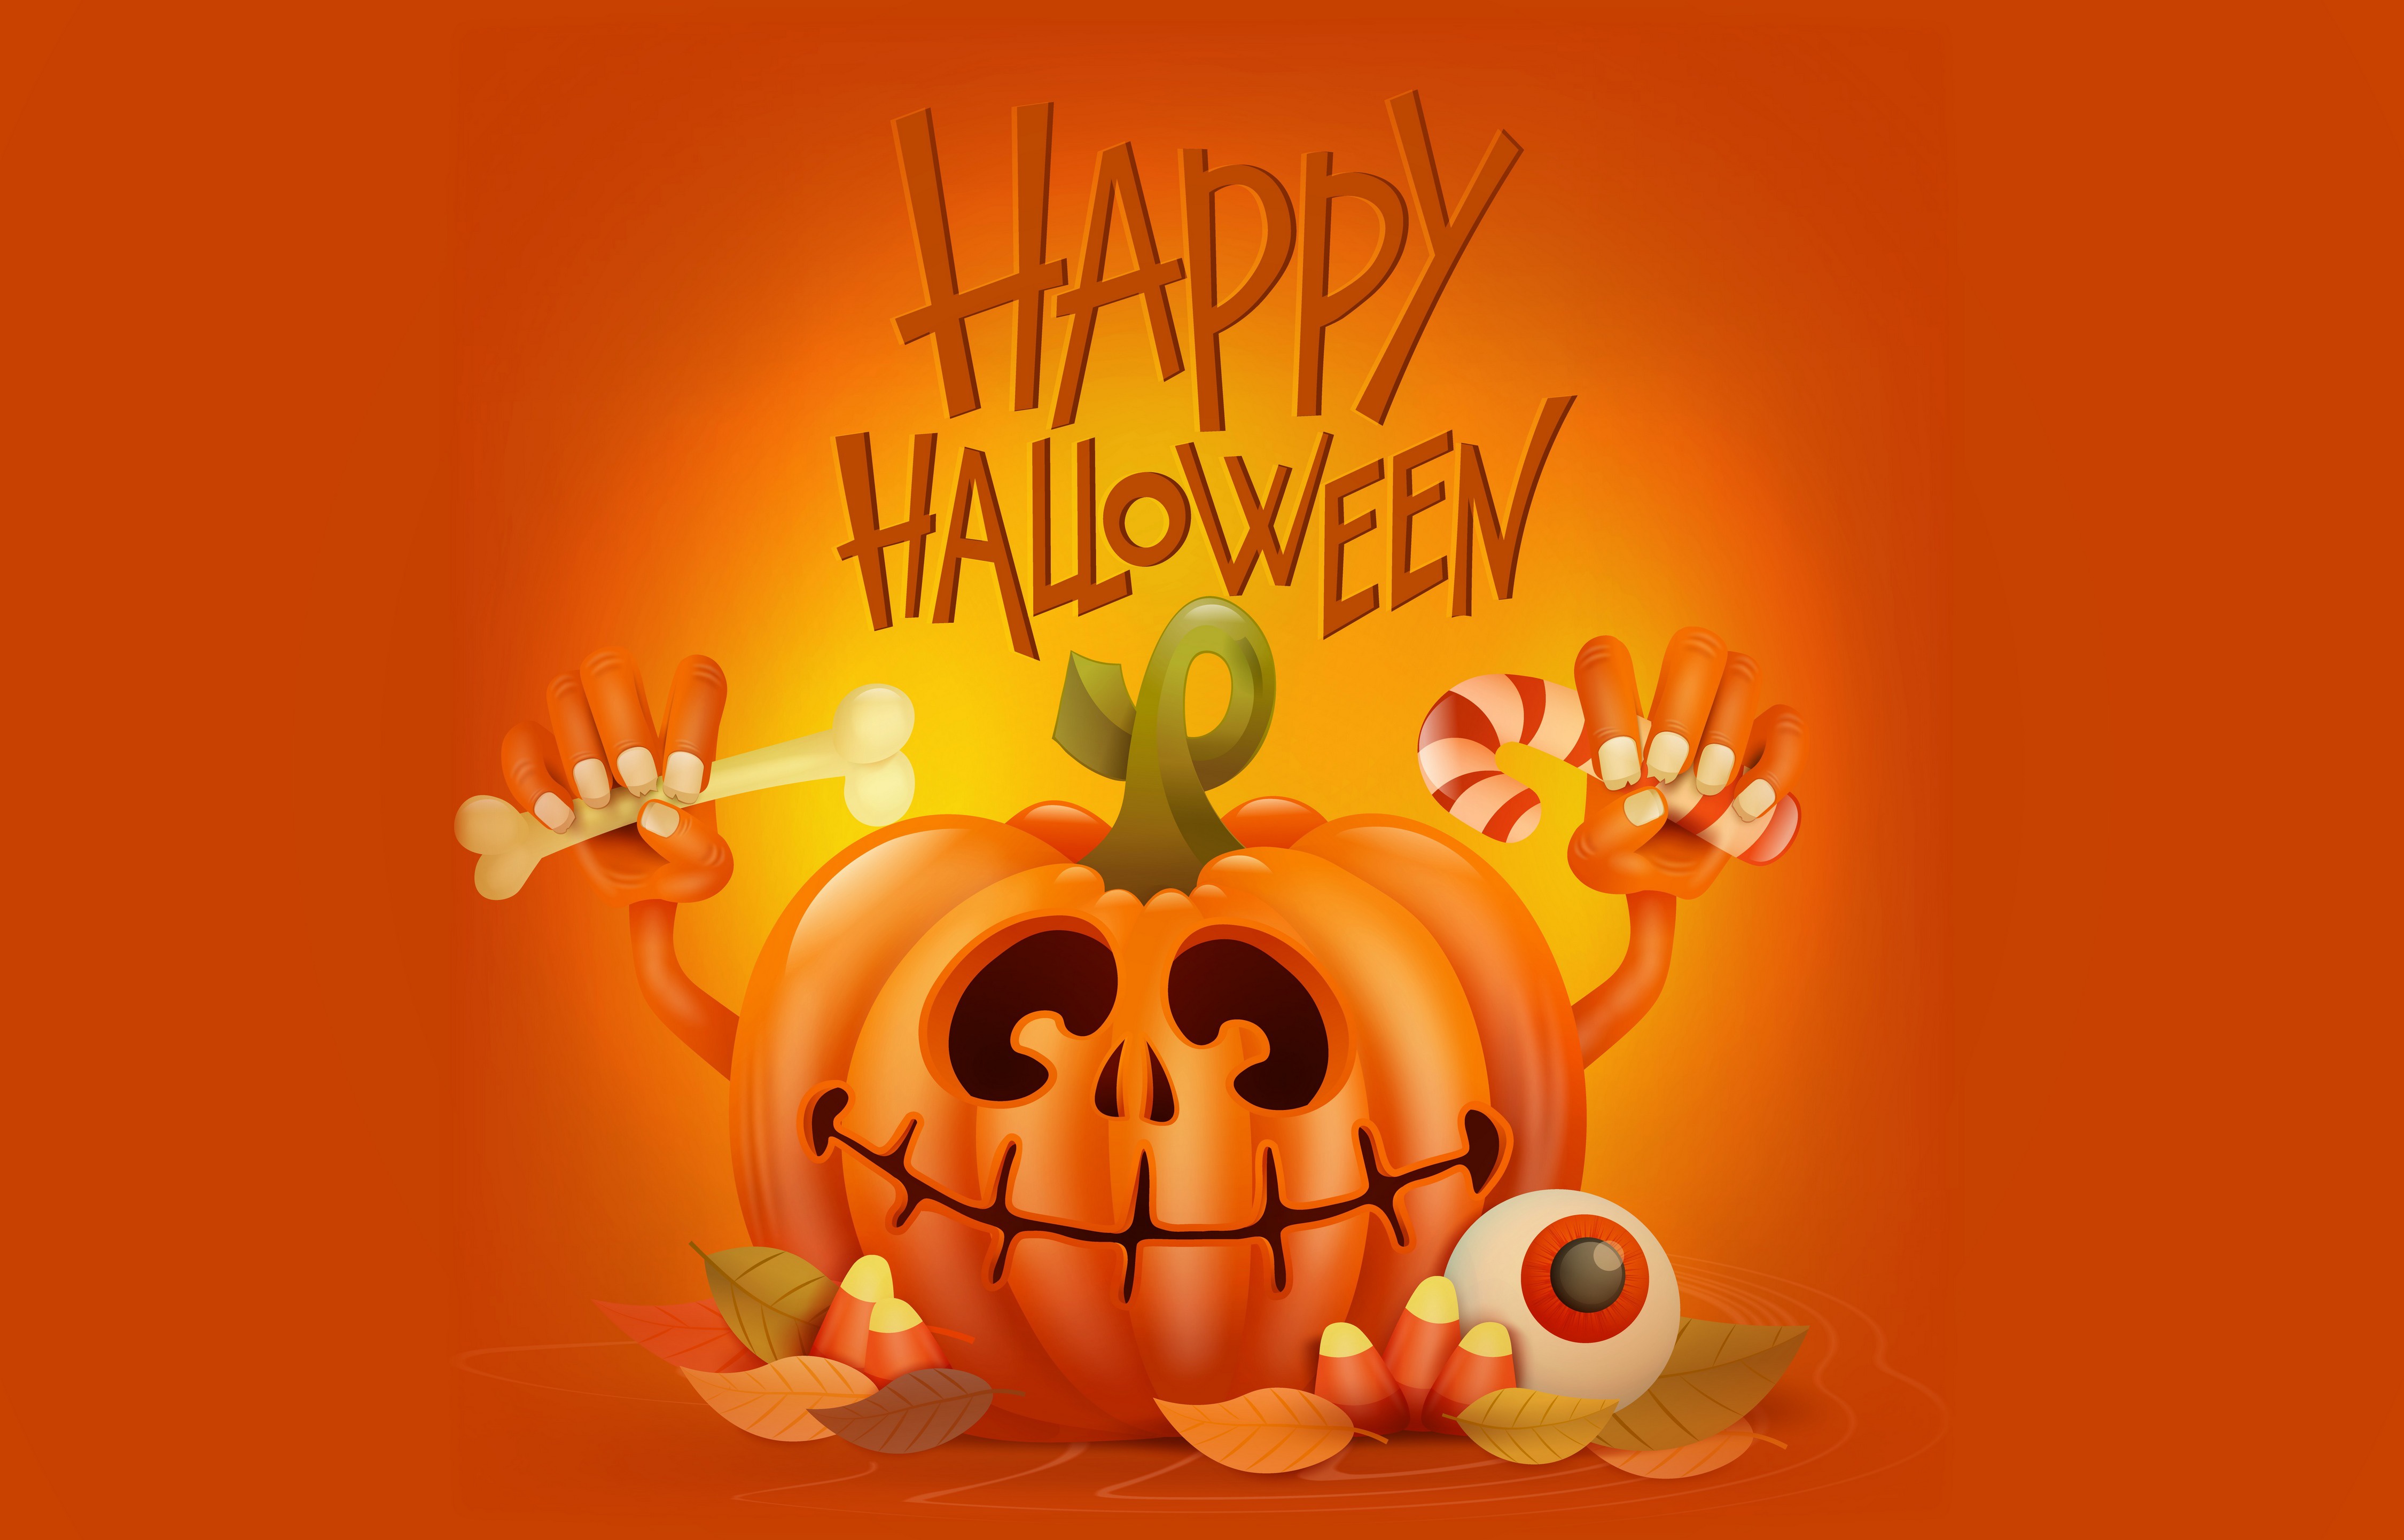 Happy Halloween 4k, HD Celebrations, 4k Wallpapers, Images, Backgrounds